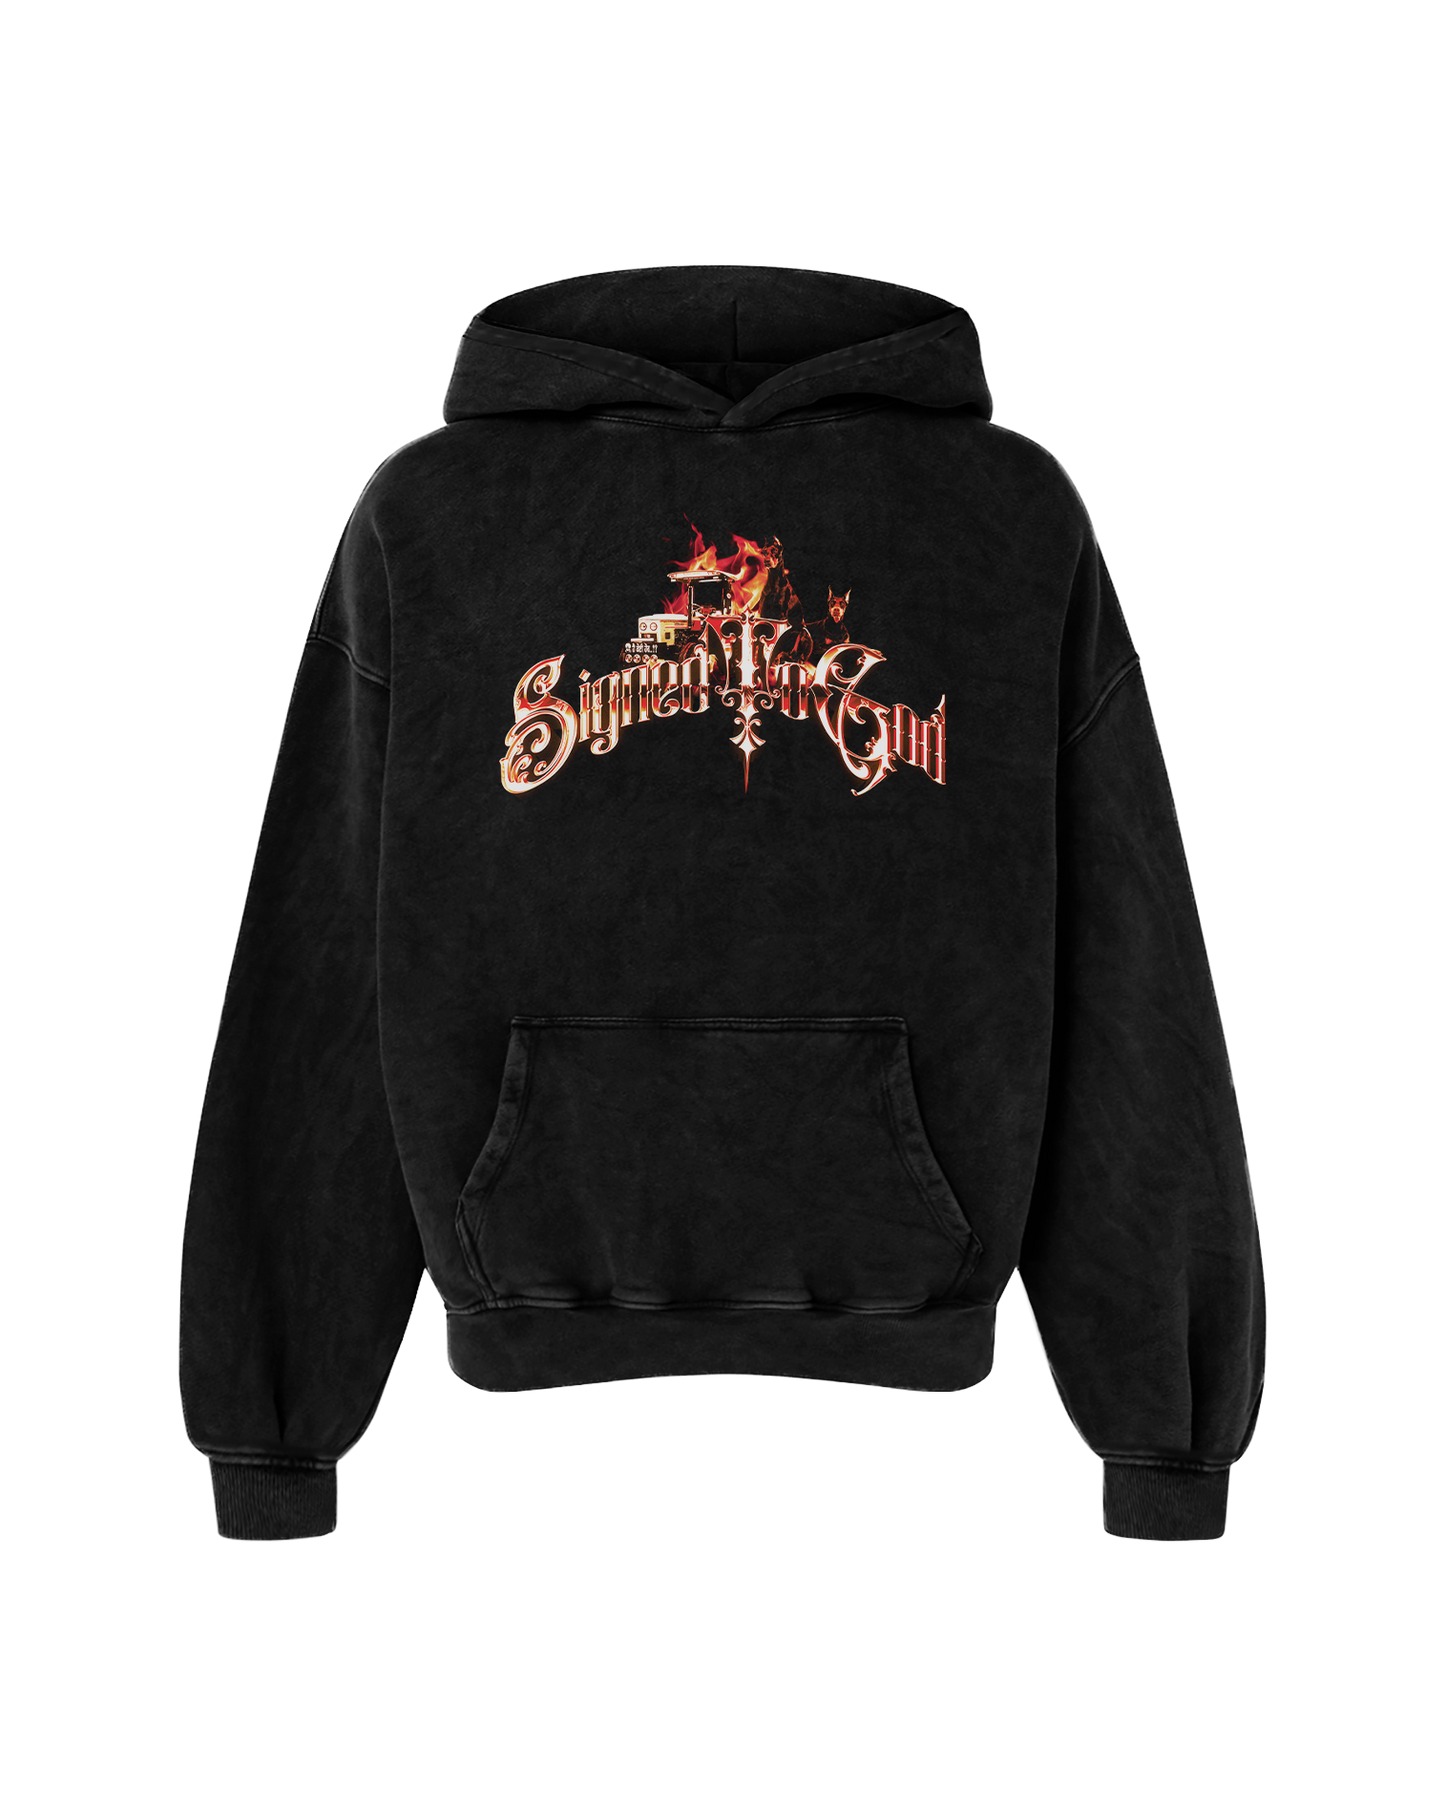 SIGNED TO GOD FLAMES EDITION OVERSIZED FADED HOODIE BLACK